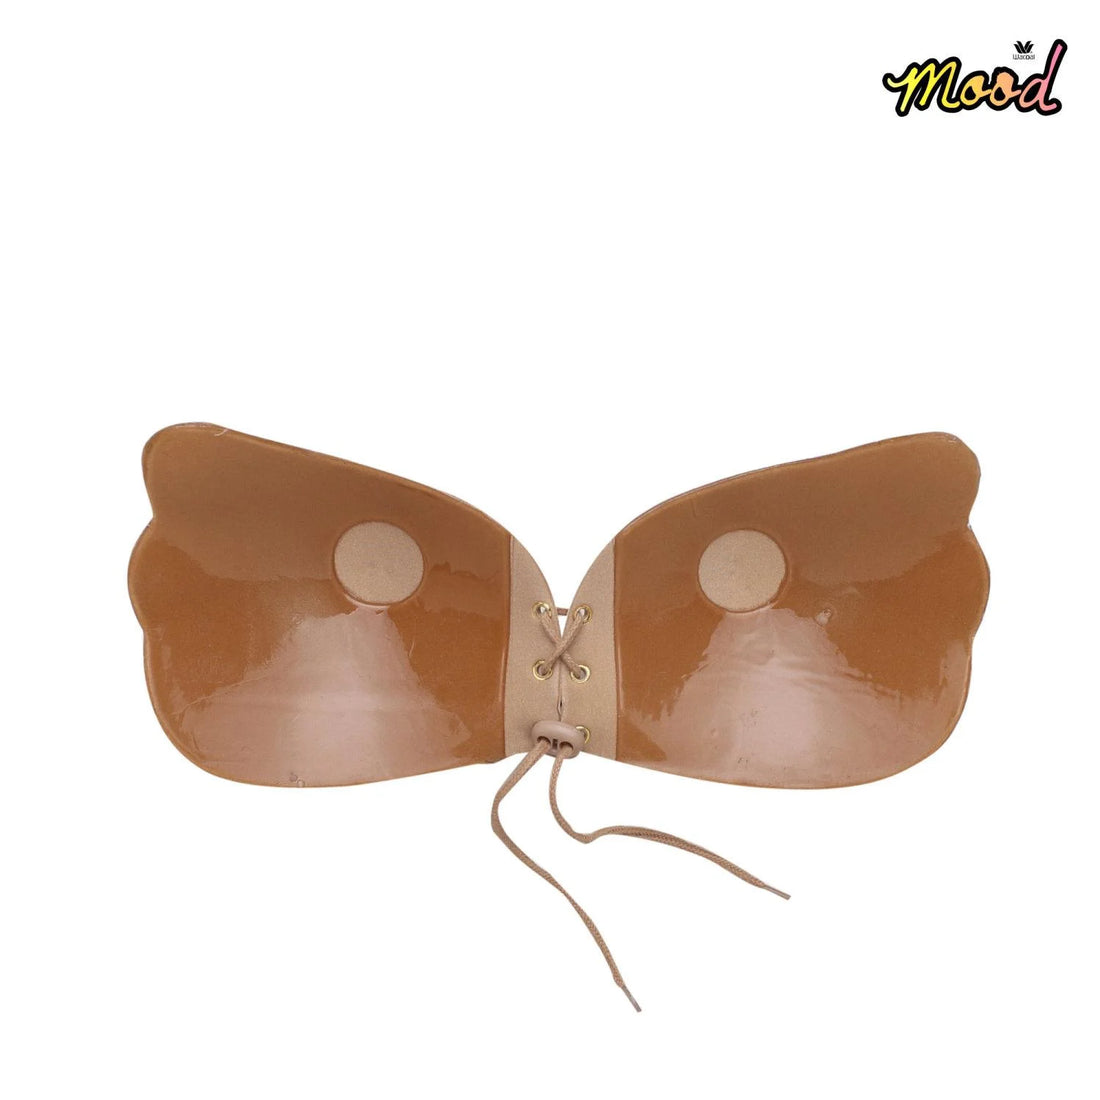 Wacoal Mood Accessories V-Push Wing Bra with String Model MM9057 Beige (BE)